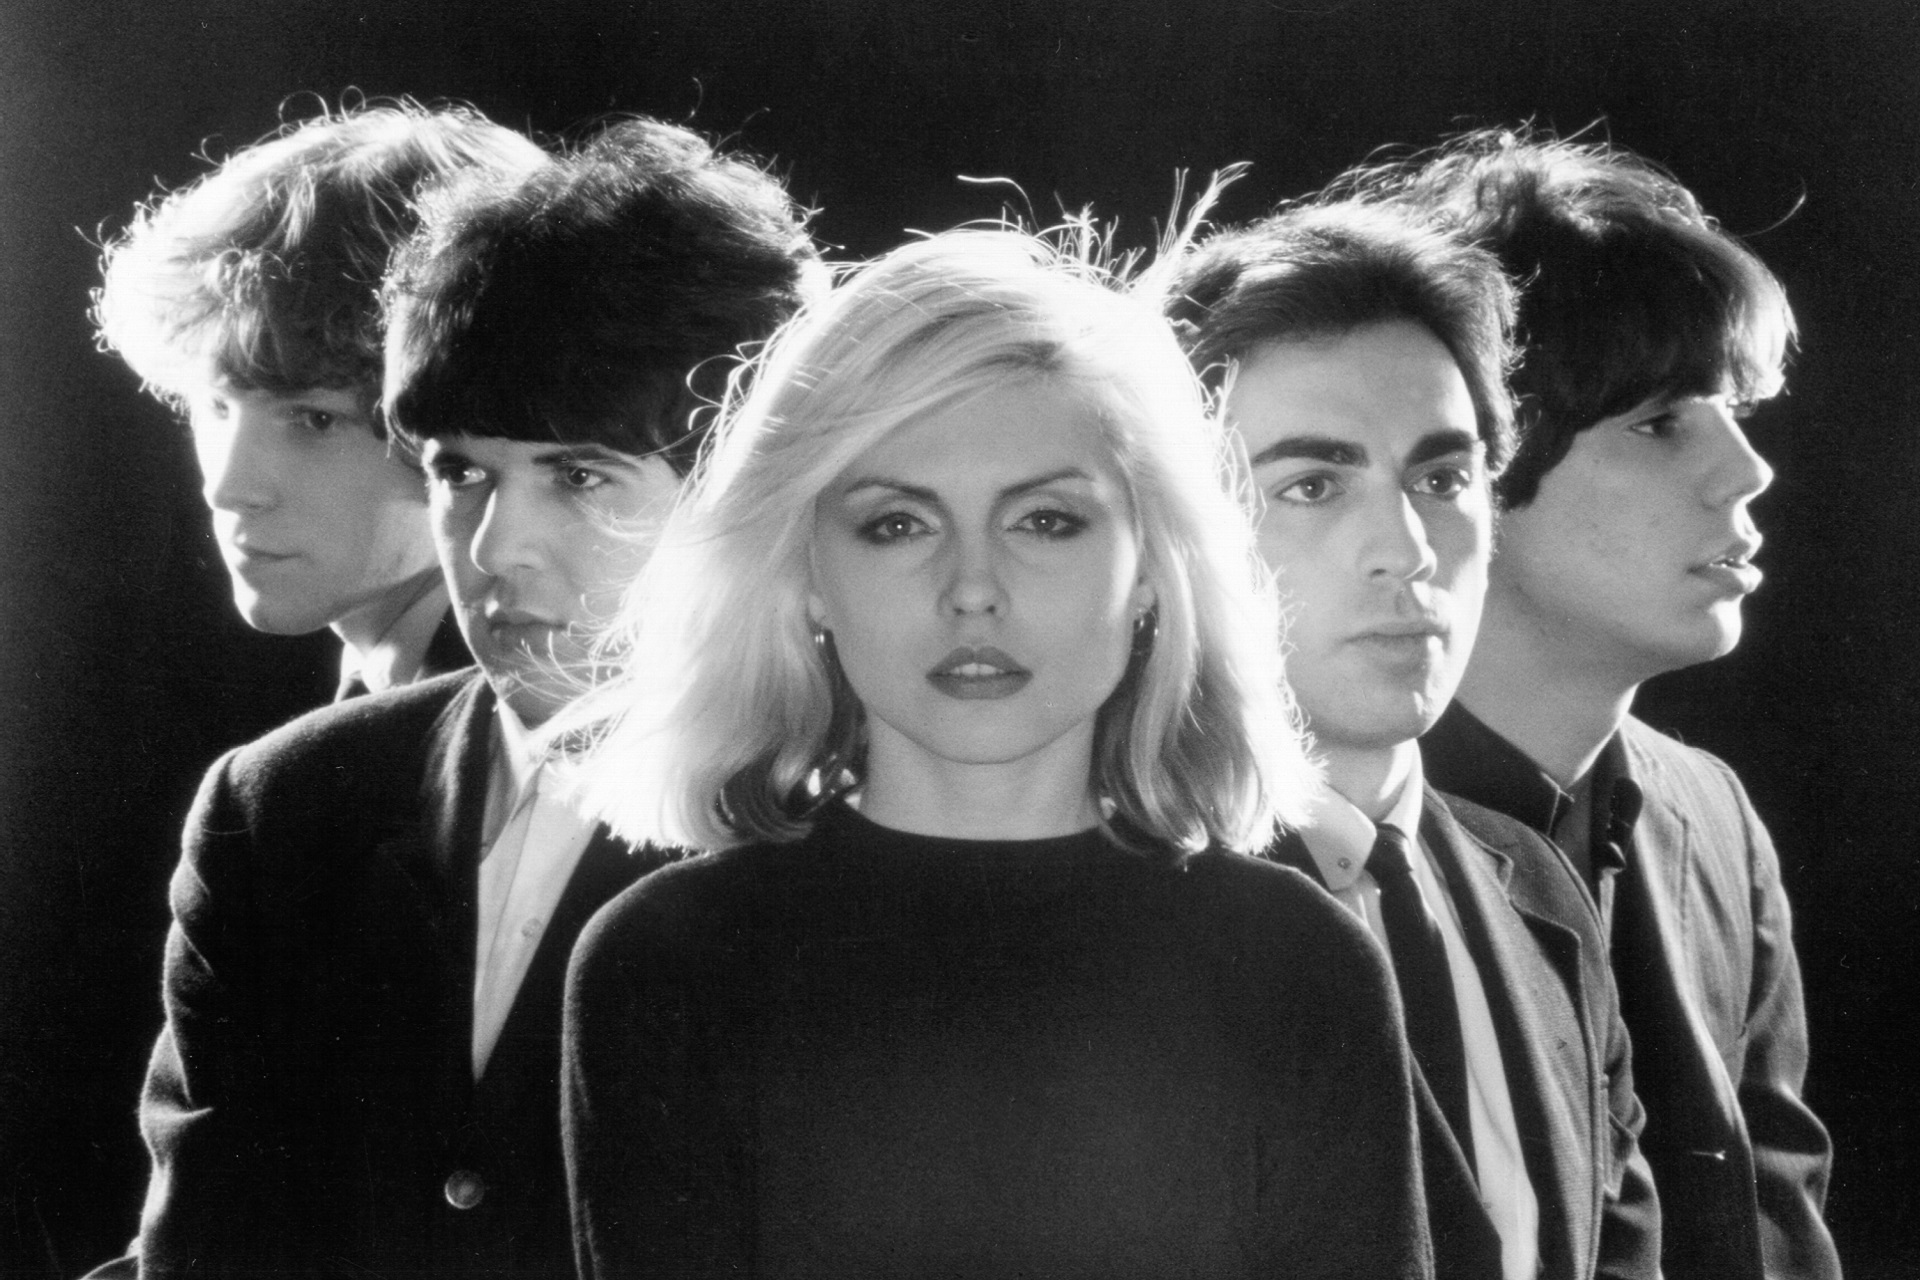 Blondie: fabulous photos of Debbie Harry in the 70s and 80s